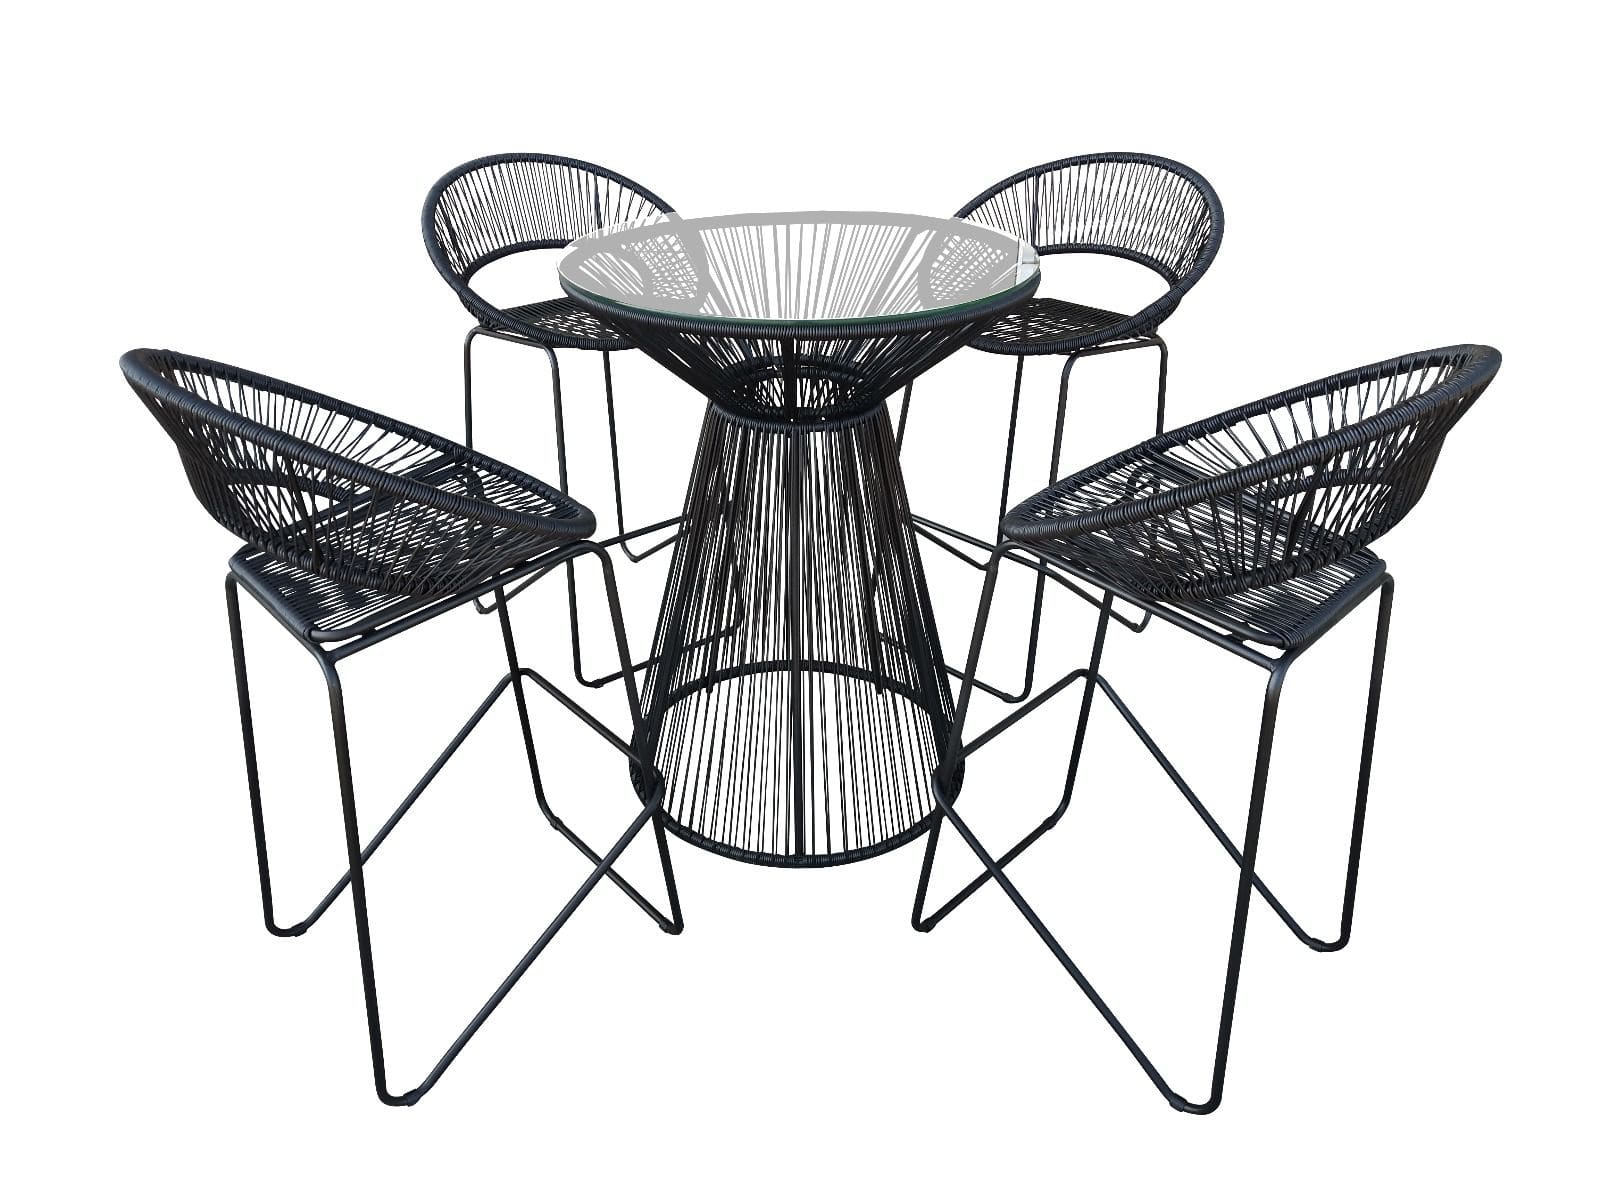 Harmonia Living Barstool and Table Sets Jet Black Harmonia Living - Acapulco 5 Piece Bar Set - Table and Four Bar Chairs | HL-ACA-5BCS